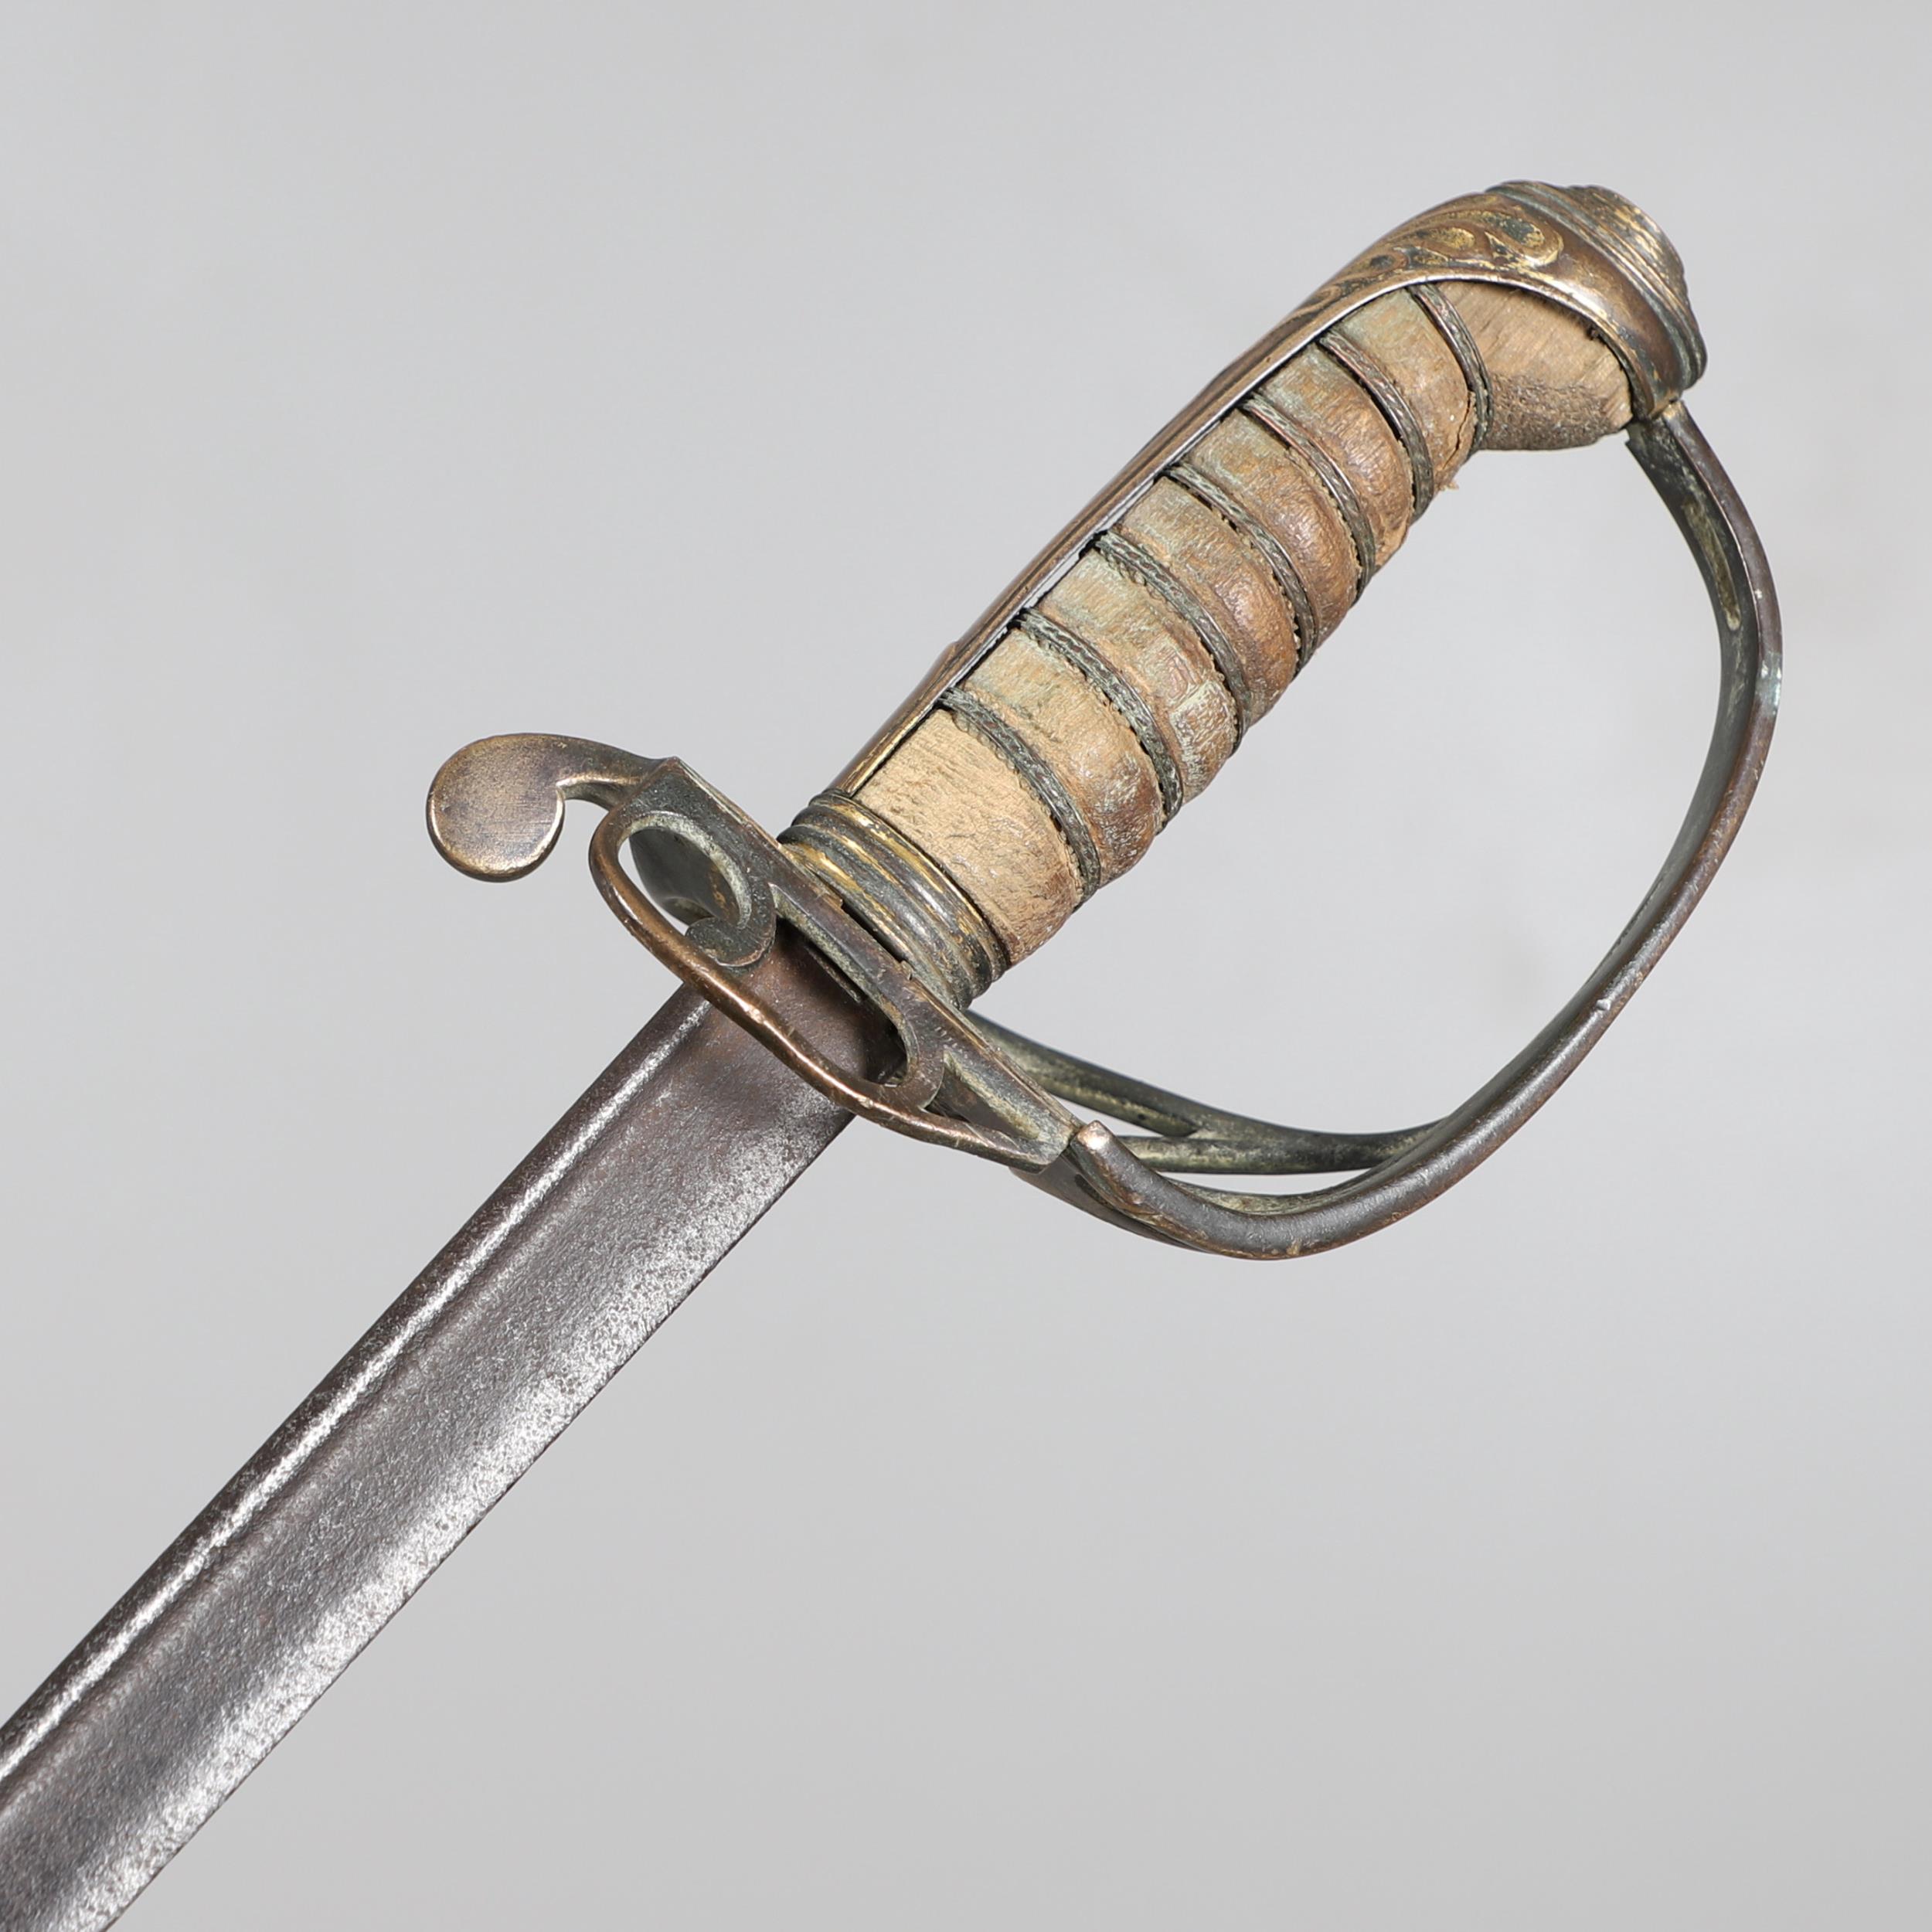 AN EAST INDIA COMPANY OFFICER'S 1822 PATTERN SWORD. - Image 2 of 10